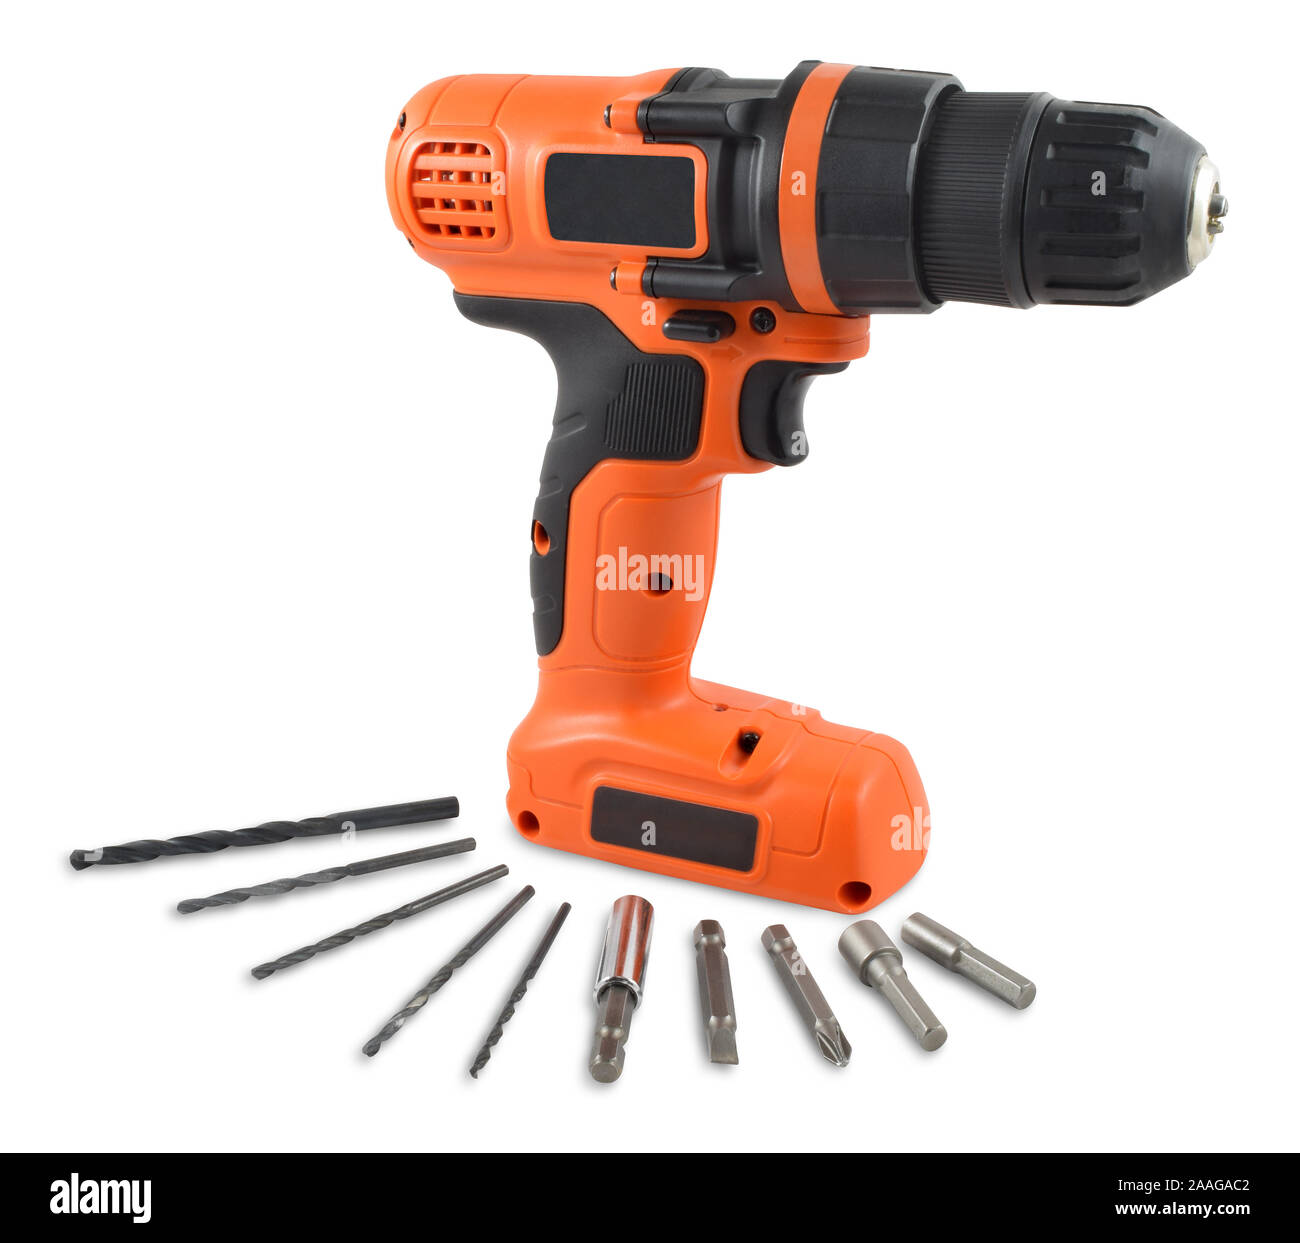 https://c8.alamy.com/comp/2AAGAC2/black-and-orange-cordless-drill-driver-with-drill-and-screwdriver-bits-isolated-on-white-background-contains-clipping-path-for-ease-of-use-2AAGAC2.jpg